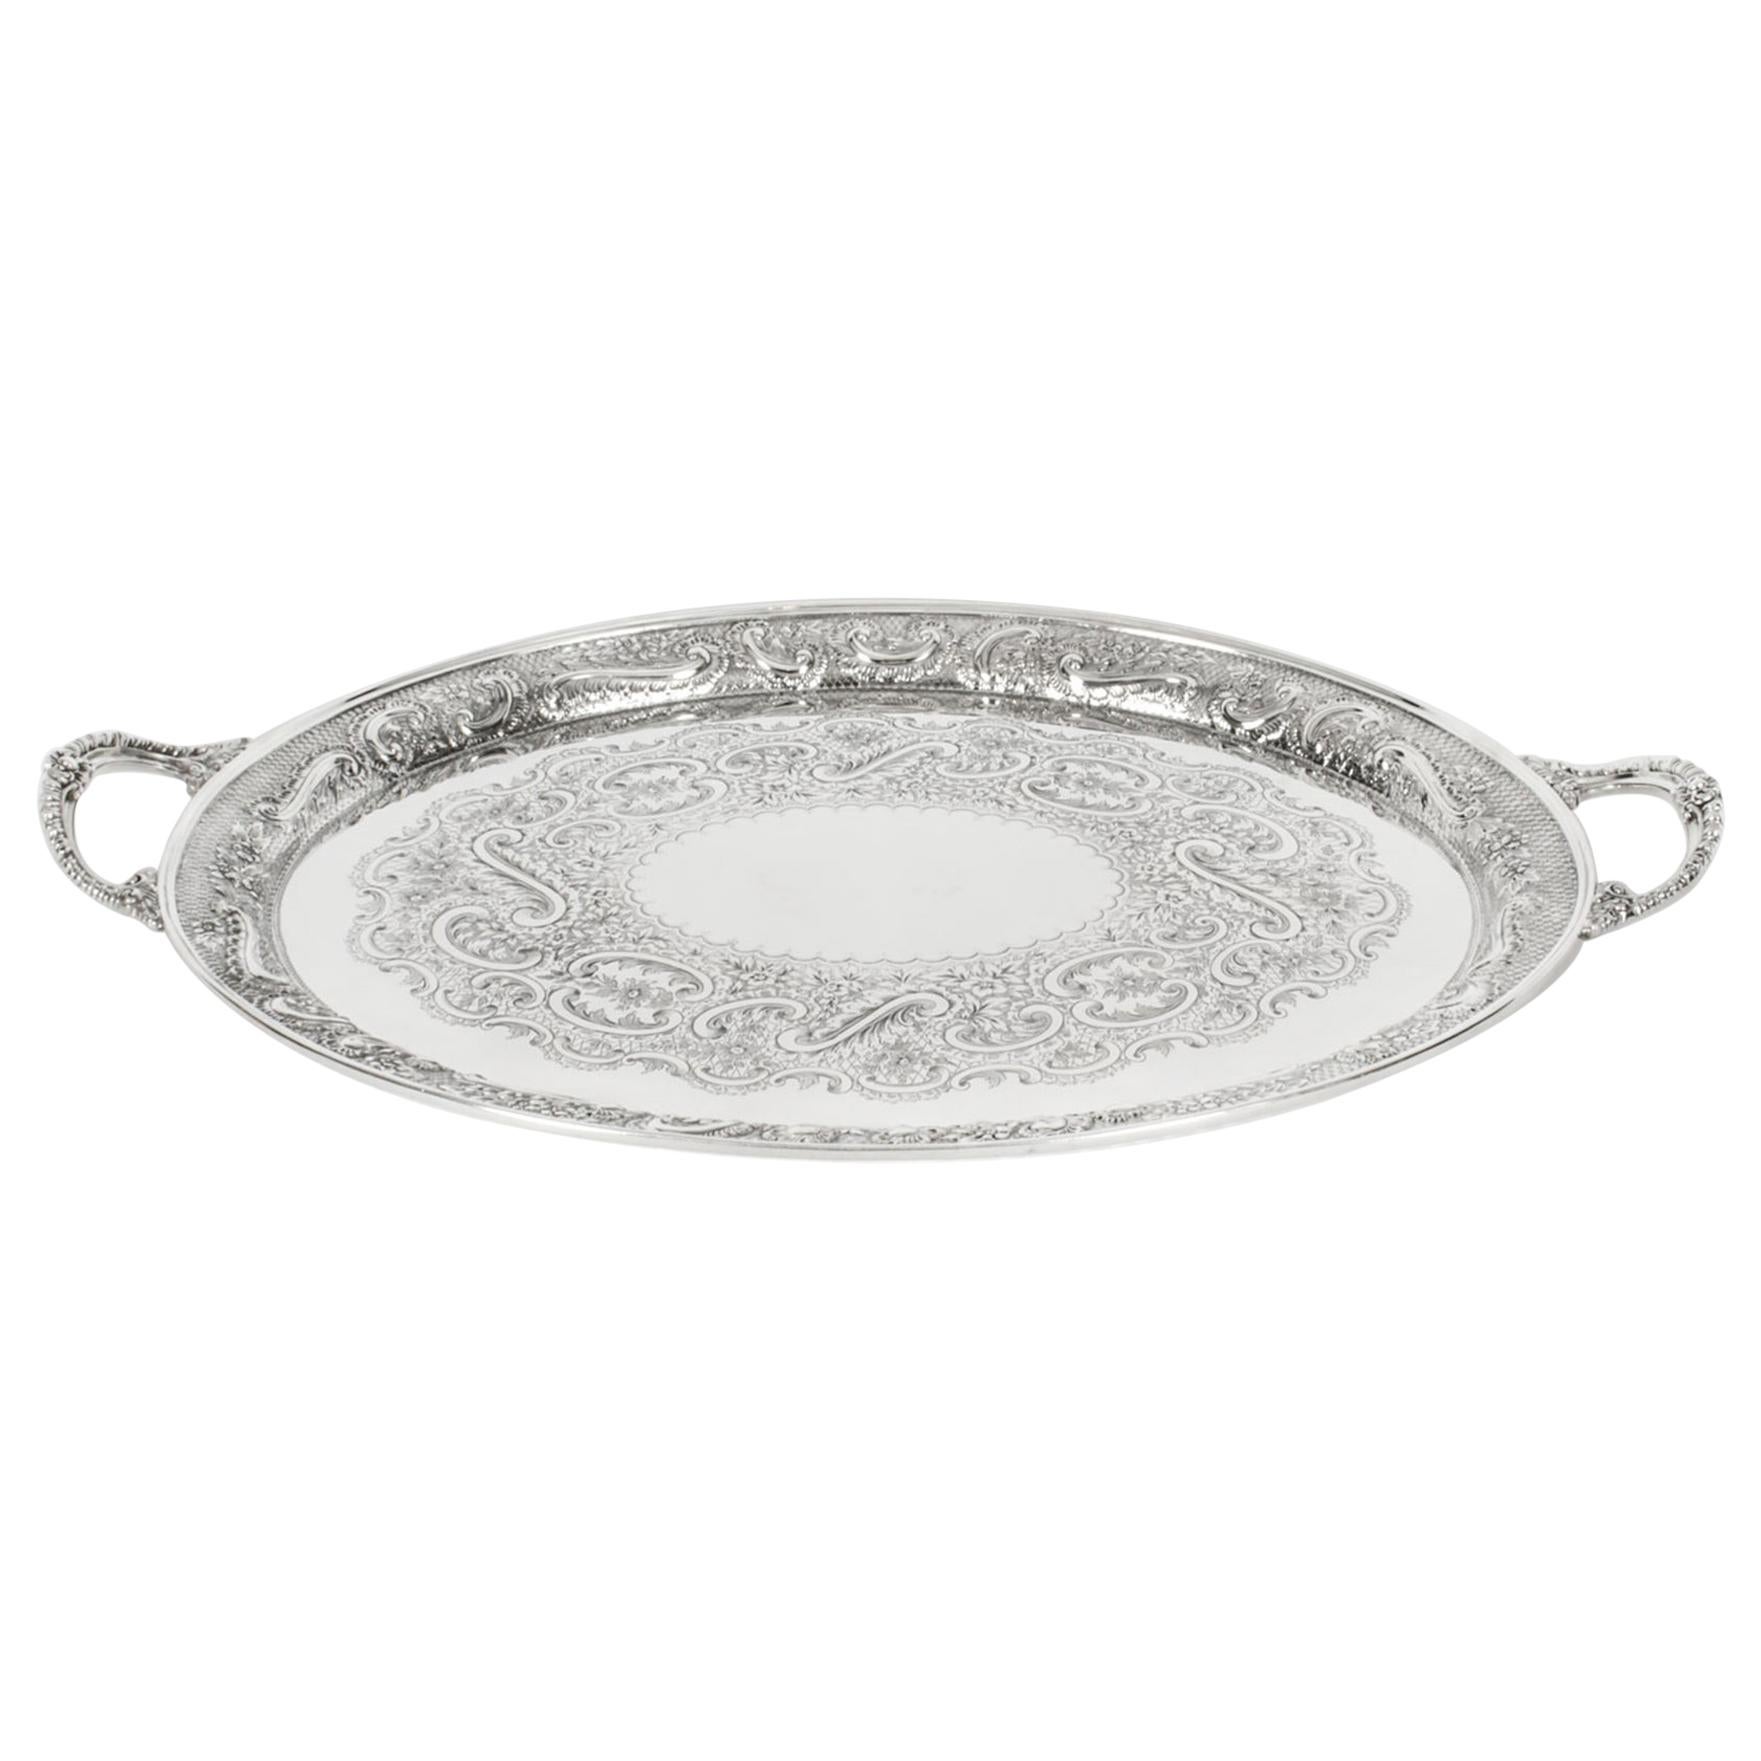 Antique Oval Victorian Silver Plated Tray by Mappin & Webb, 19th Century